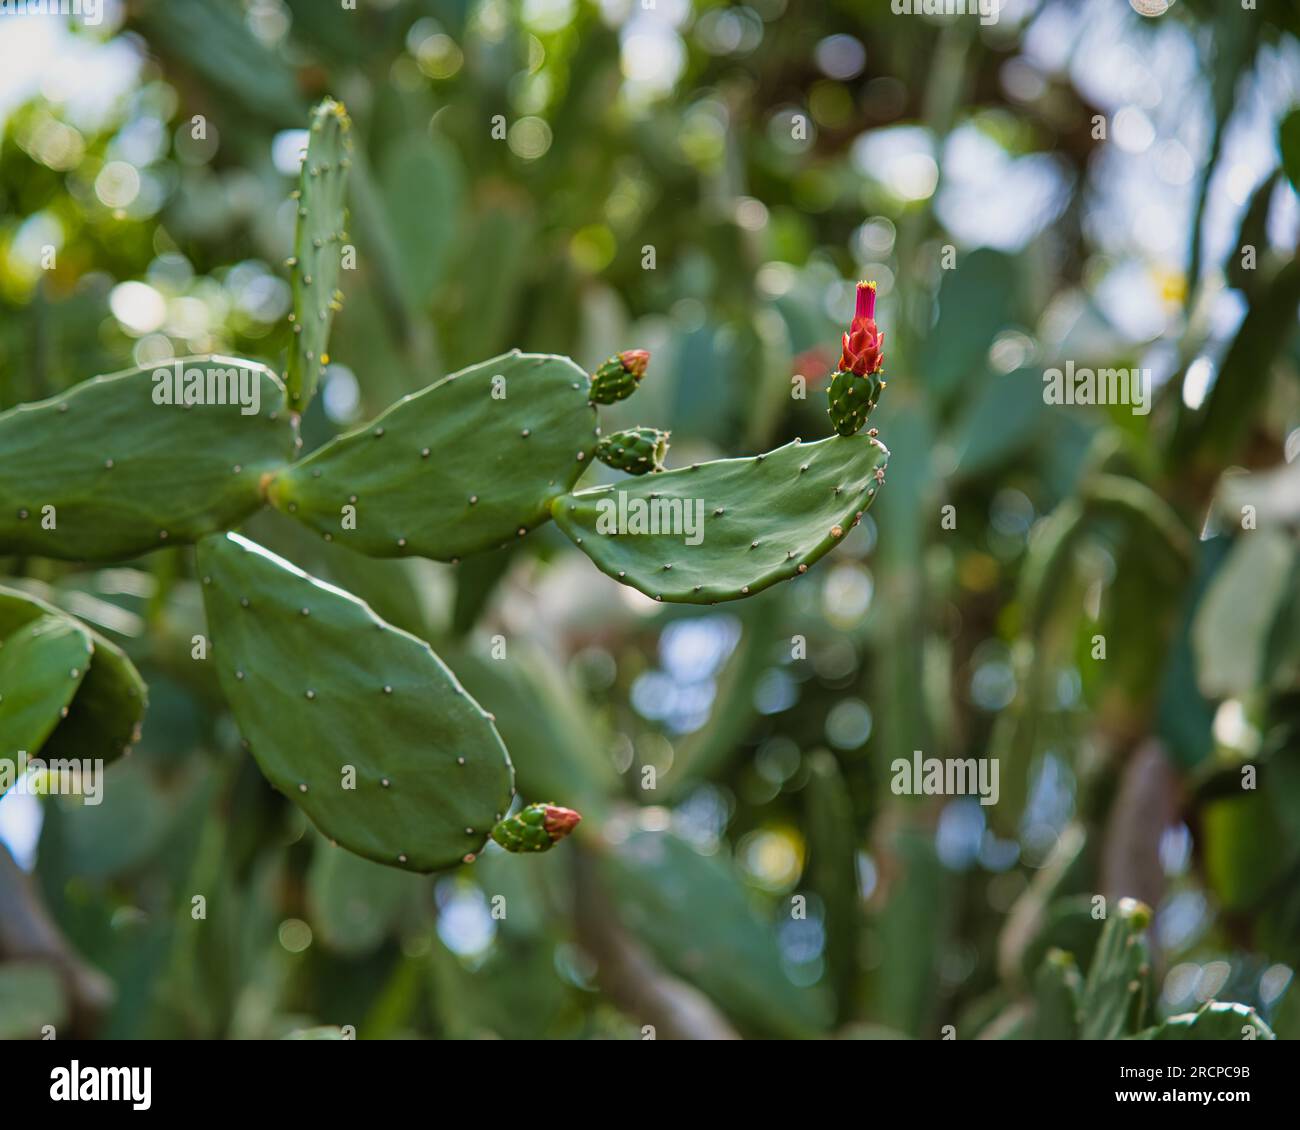 Closeup of cactus plant and its red flowers, Mahe Seychelles Stock Photo